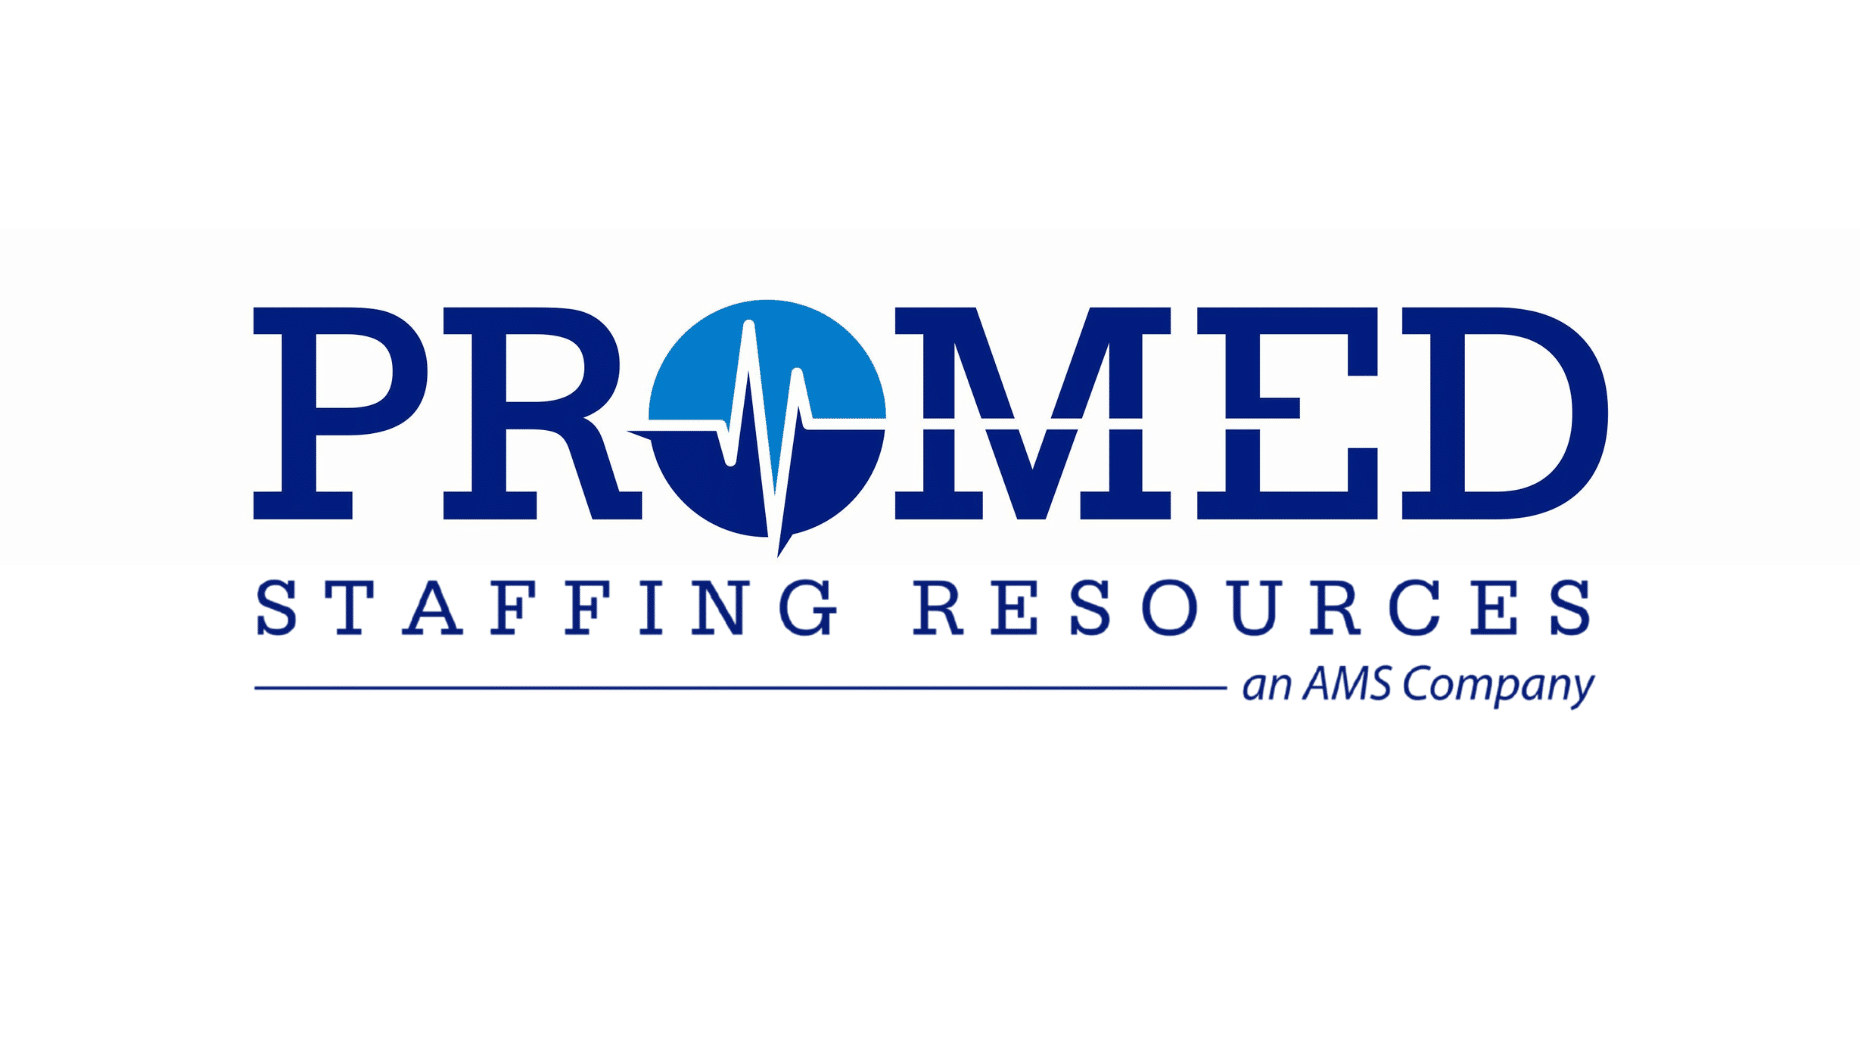 The photo depicts the new logo which is a part of ProMed Staffing Resources new brand identity